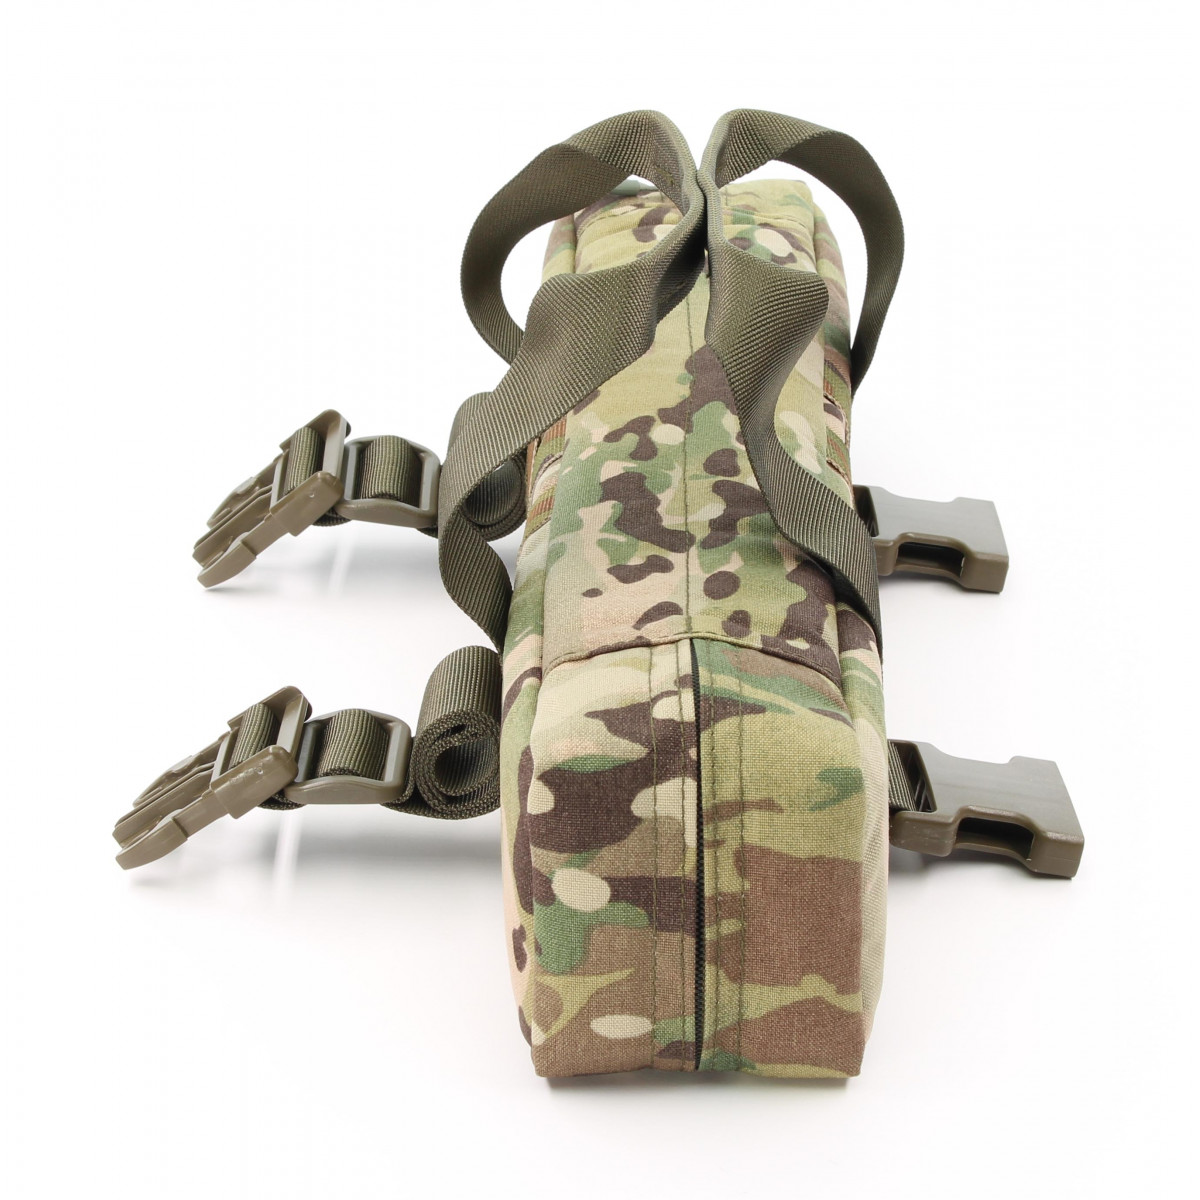 padded protective bag for scopes in multicam